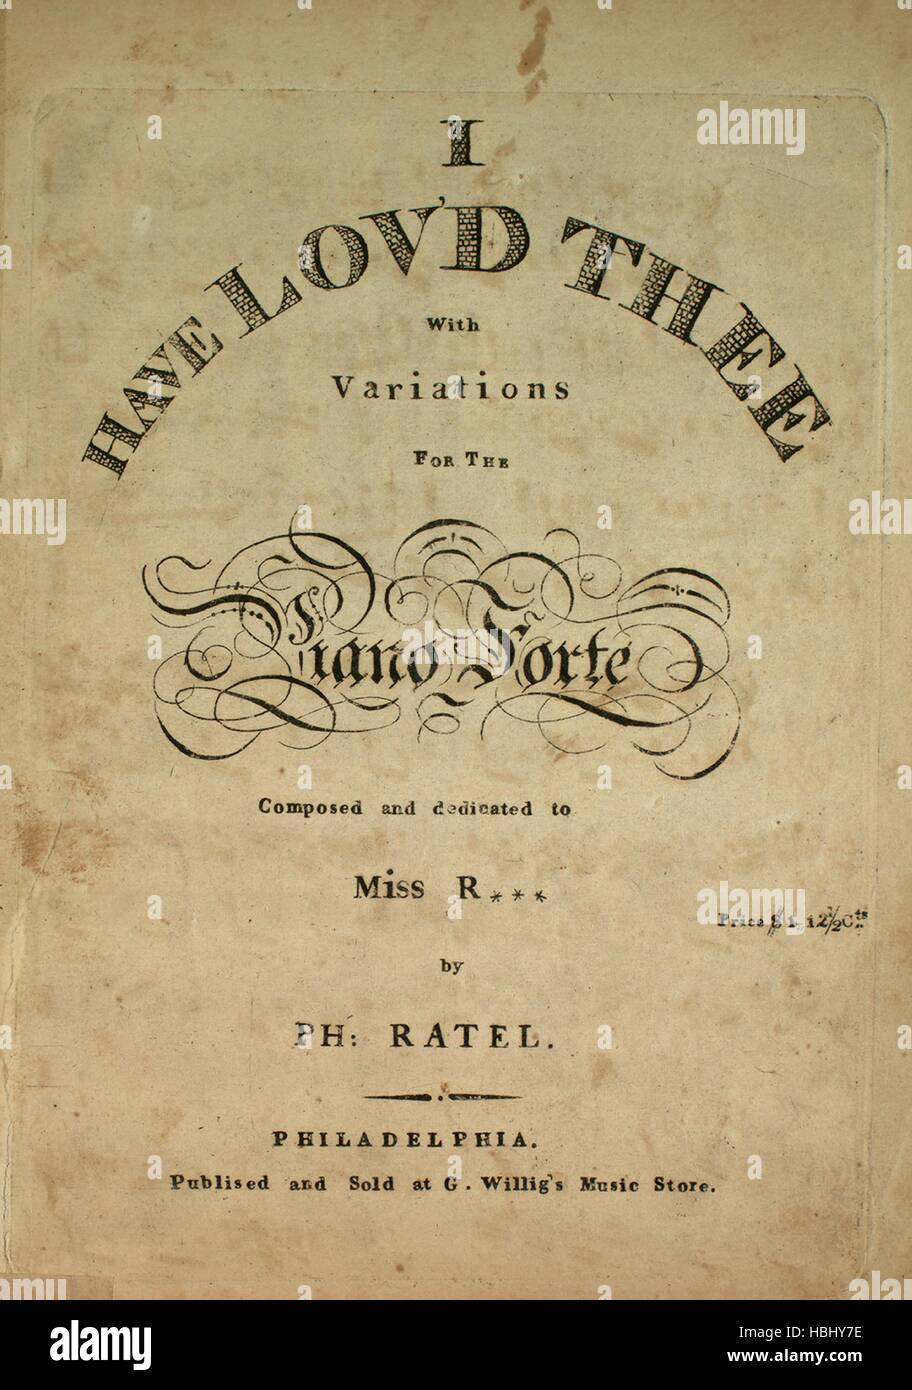 Sheet music cover image of the song 'I Have Lov'd Thee With Variations for the Piano Forte', with original authorship notes reading 'Composed by Ph Ratel', United States, 1900. The publisher is listed as 'G. Willig's Music Store', the form of composition is 'theme and variation', the instrumentation is 'piano', the first line reads 'None', and the illustration artist is listed as 'None'. Stock Photo